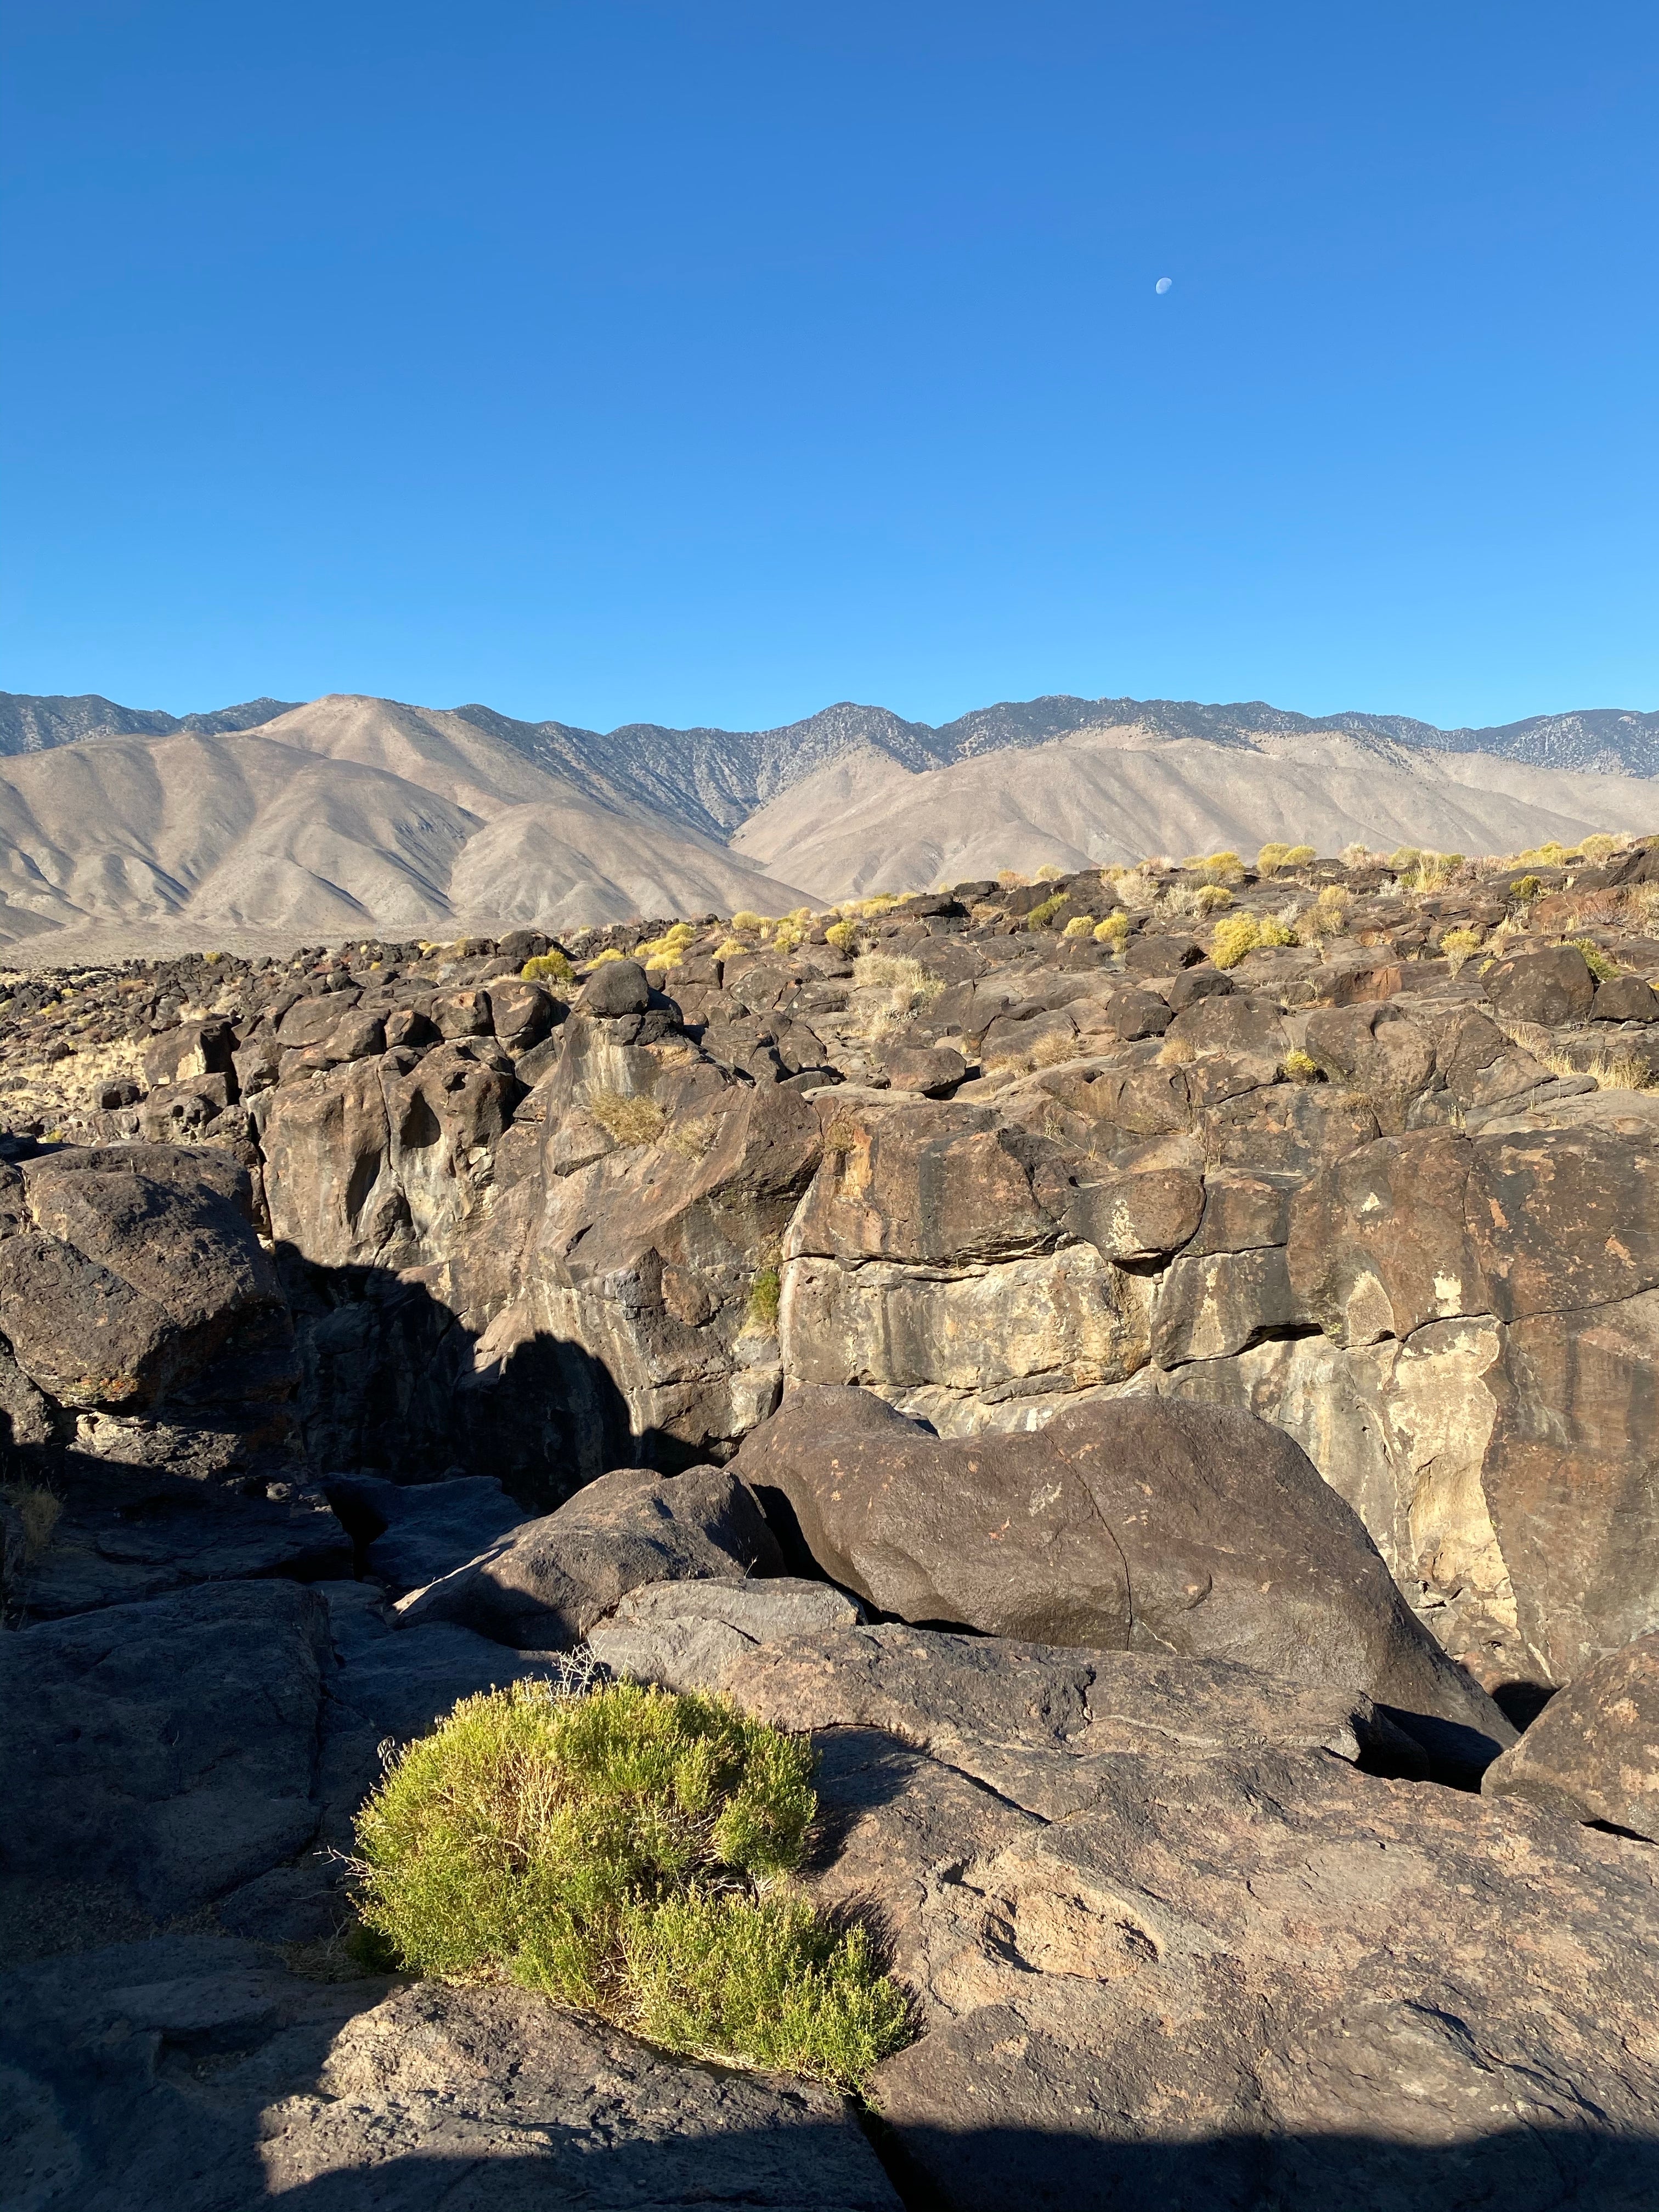 Camper submitted image from Fossil Falls dry lake bed - 2